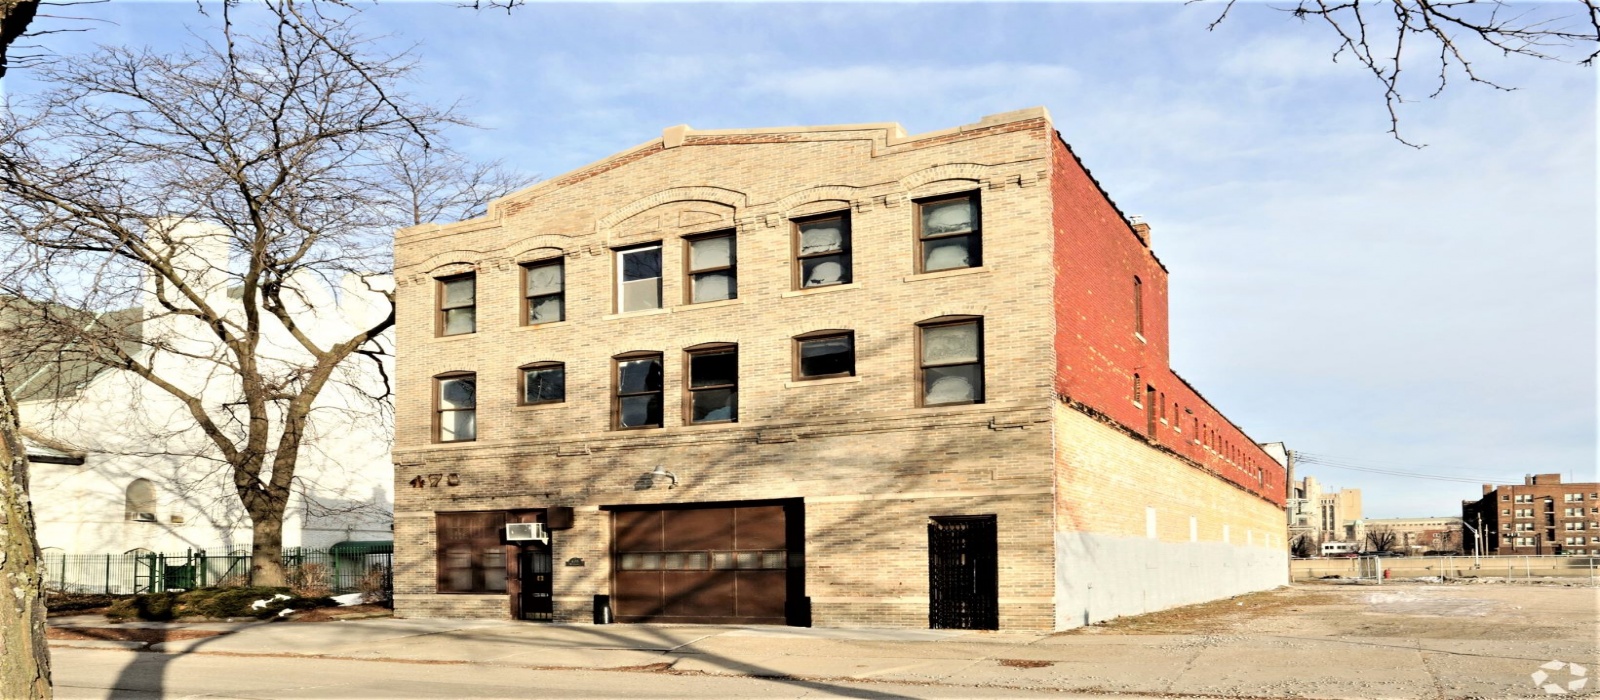 478 West Columbia, Detroit, Michigan 48201, ,Office,For Lease,478 West Columbia ,1042